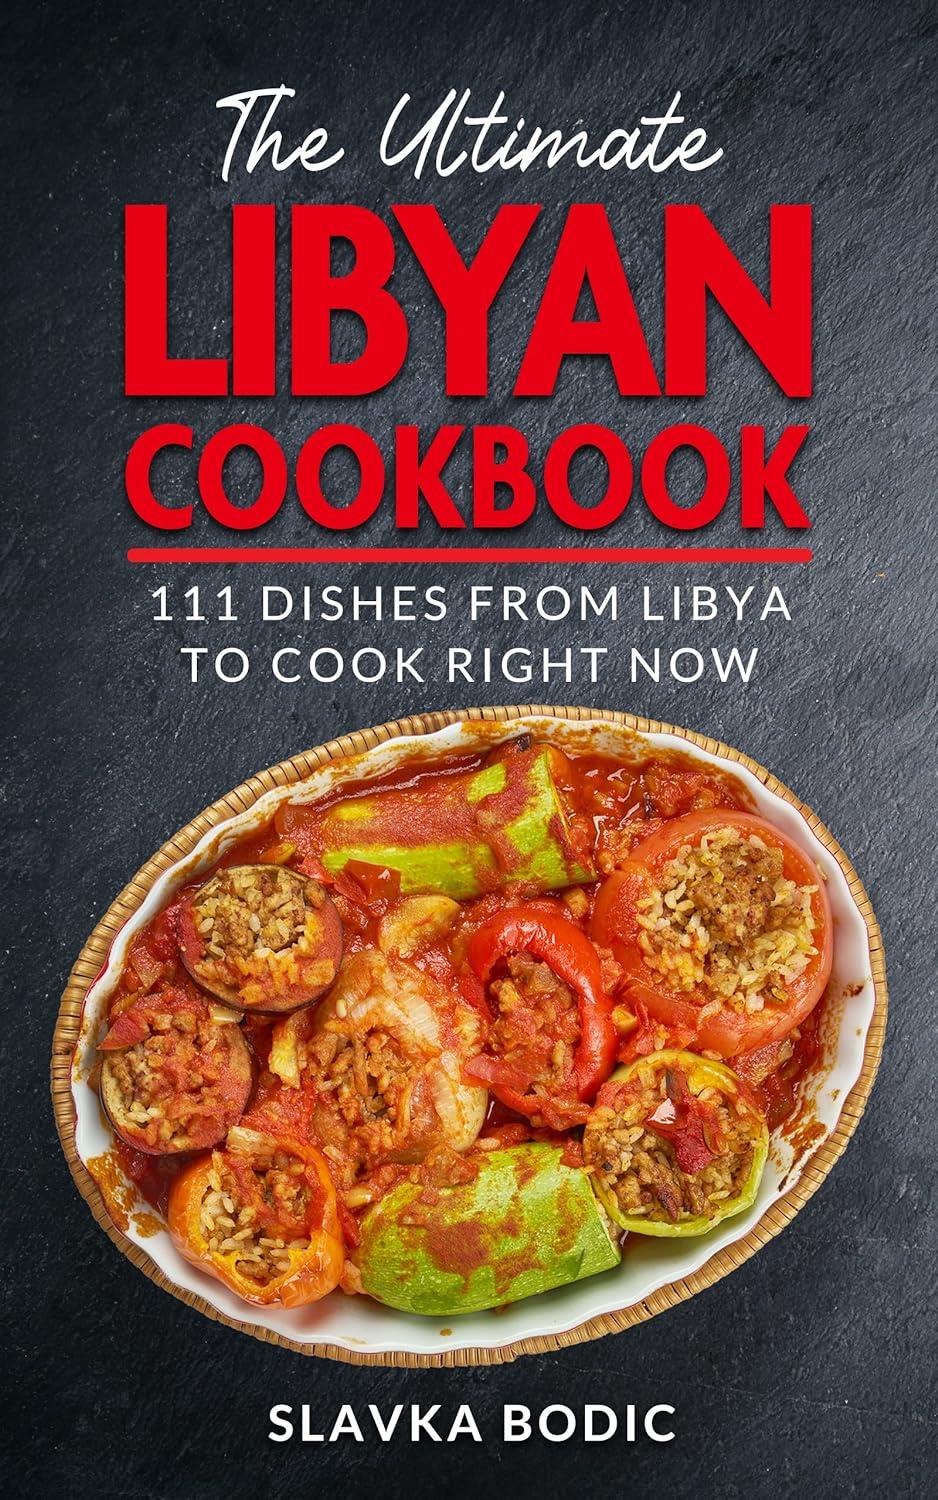 The Ultimate Libyan Cookbook 111 Dishes From Libya To Cook Right Now Softarchive 